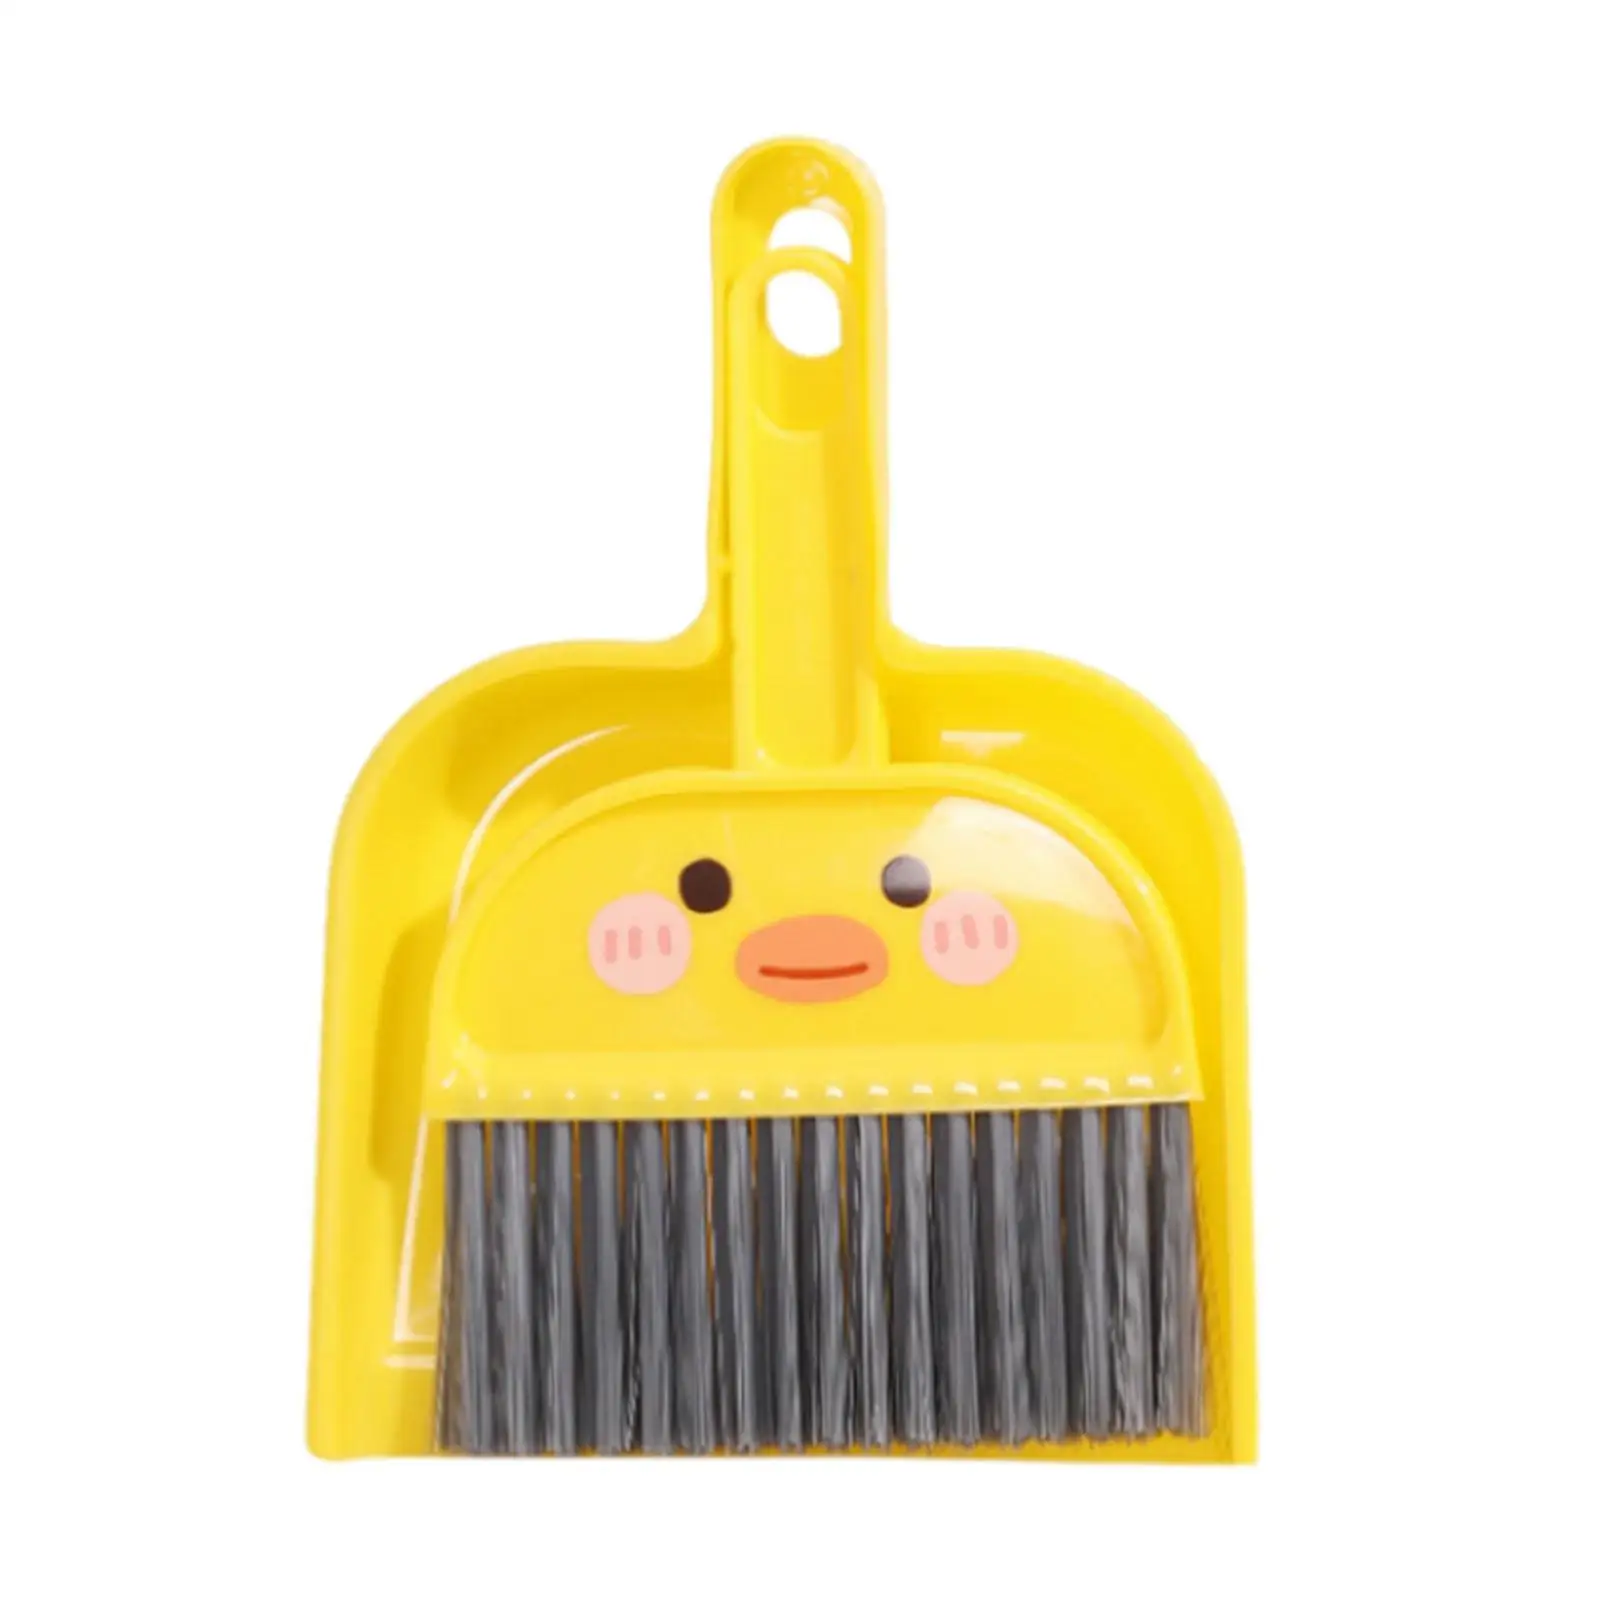 Desktop Dustpan and Broom Set Keyboard Cleaning Brush Pretend Play Toy Hand